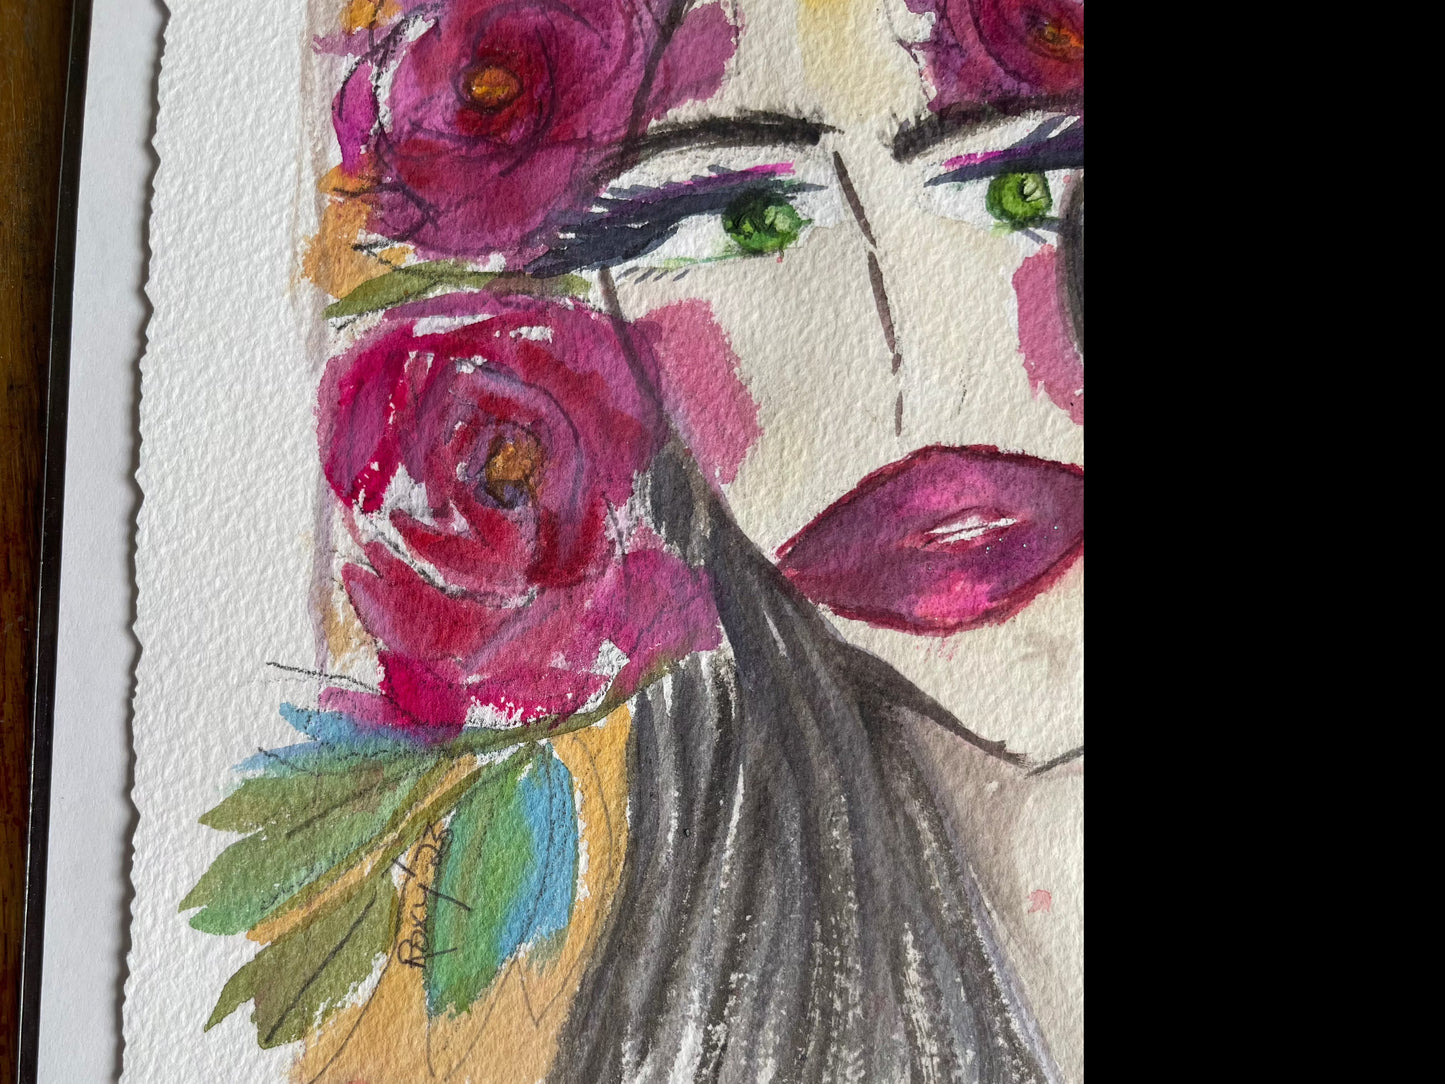 Brunette Lady with Crown of Roses "Uh-Huh" Original Watercolor Painting 6x8